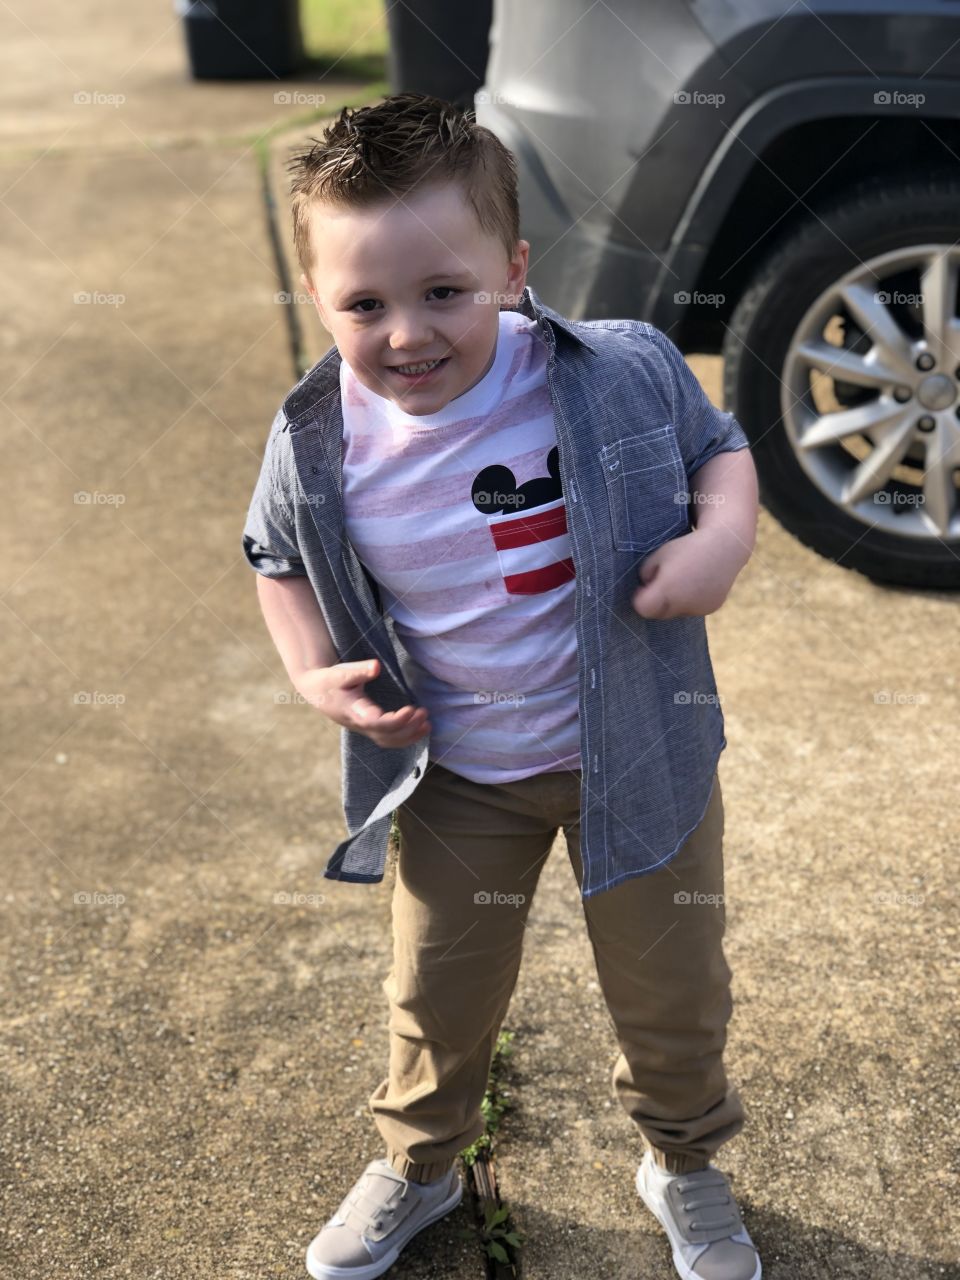 Happy toddler playing outside in the sun. Dressed up sharp, calls his own style a “rockstar”